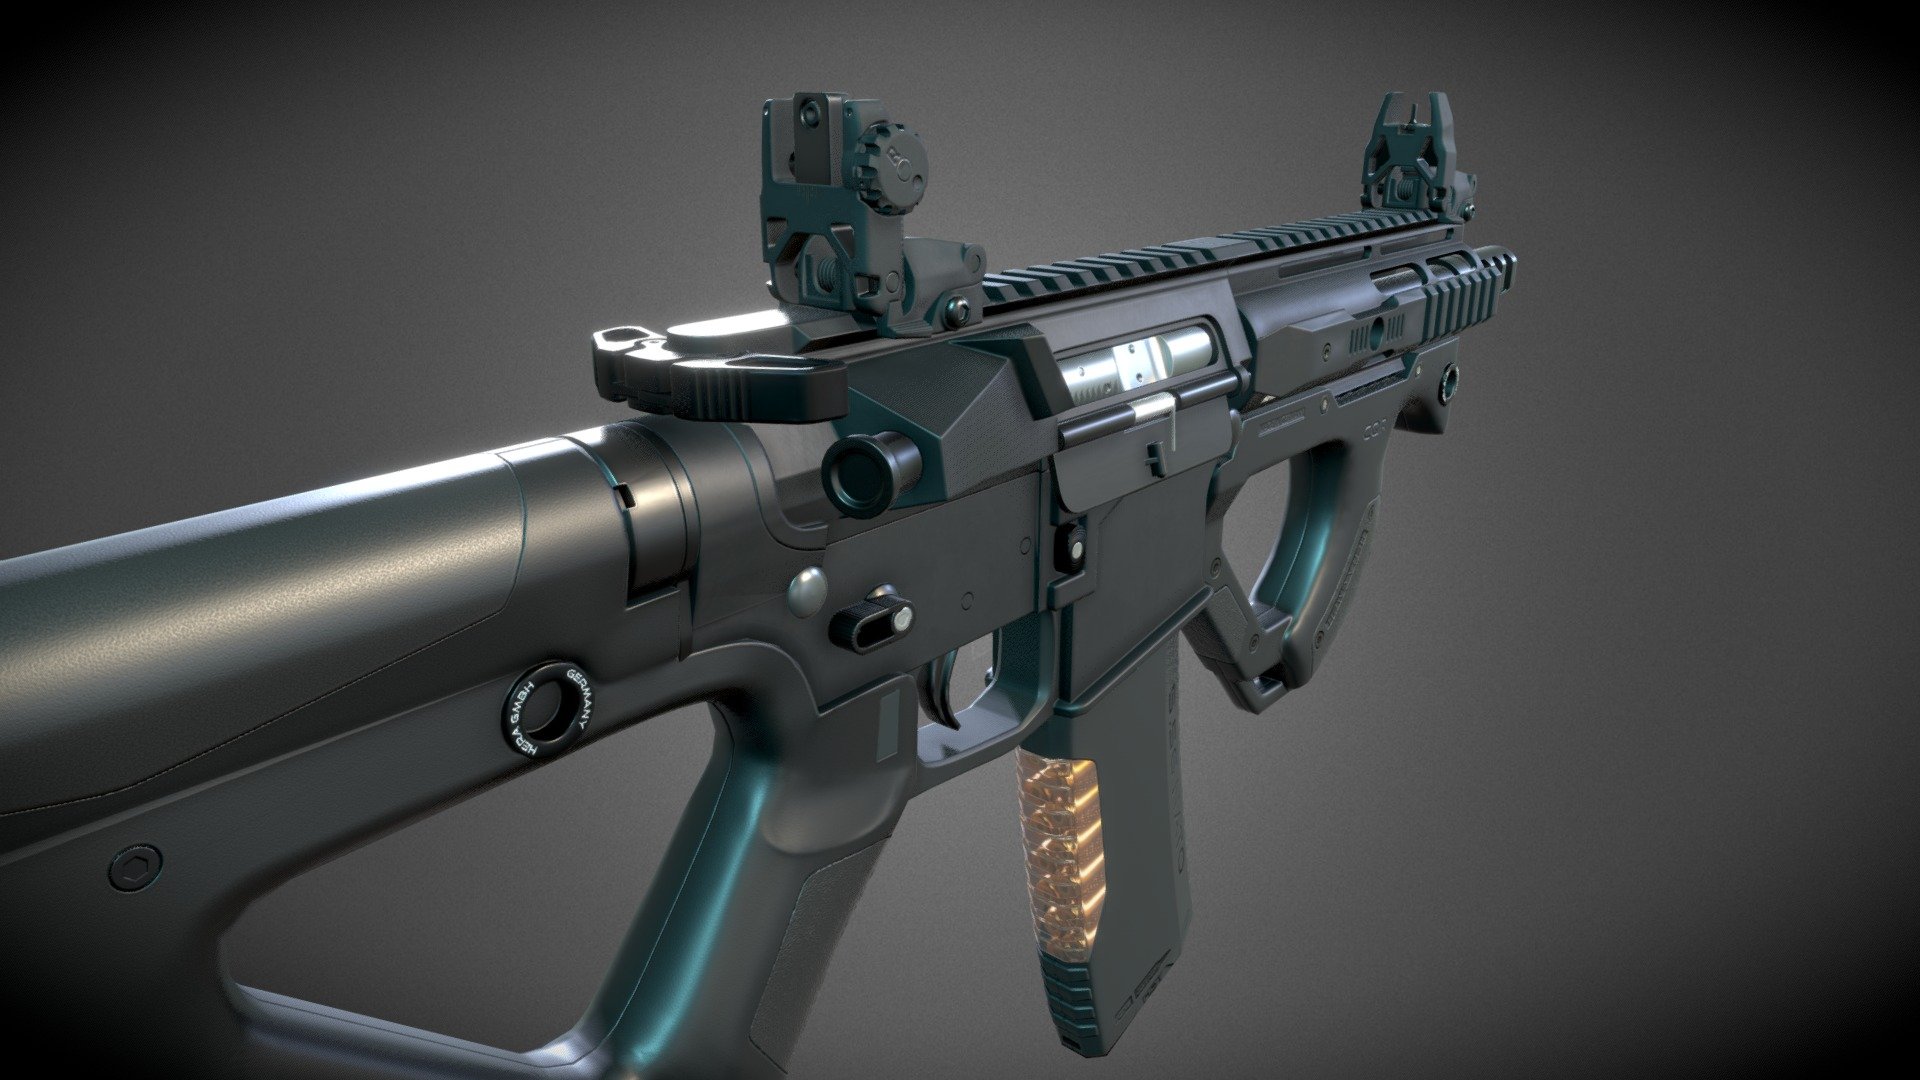 Here's a model of the Hera CQR that I made for a personal project - Hera Arms CQR - 3D model by jadamsgamedev 3d model